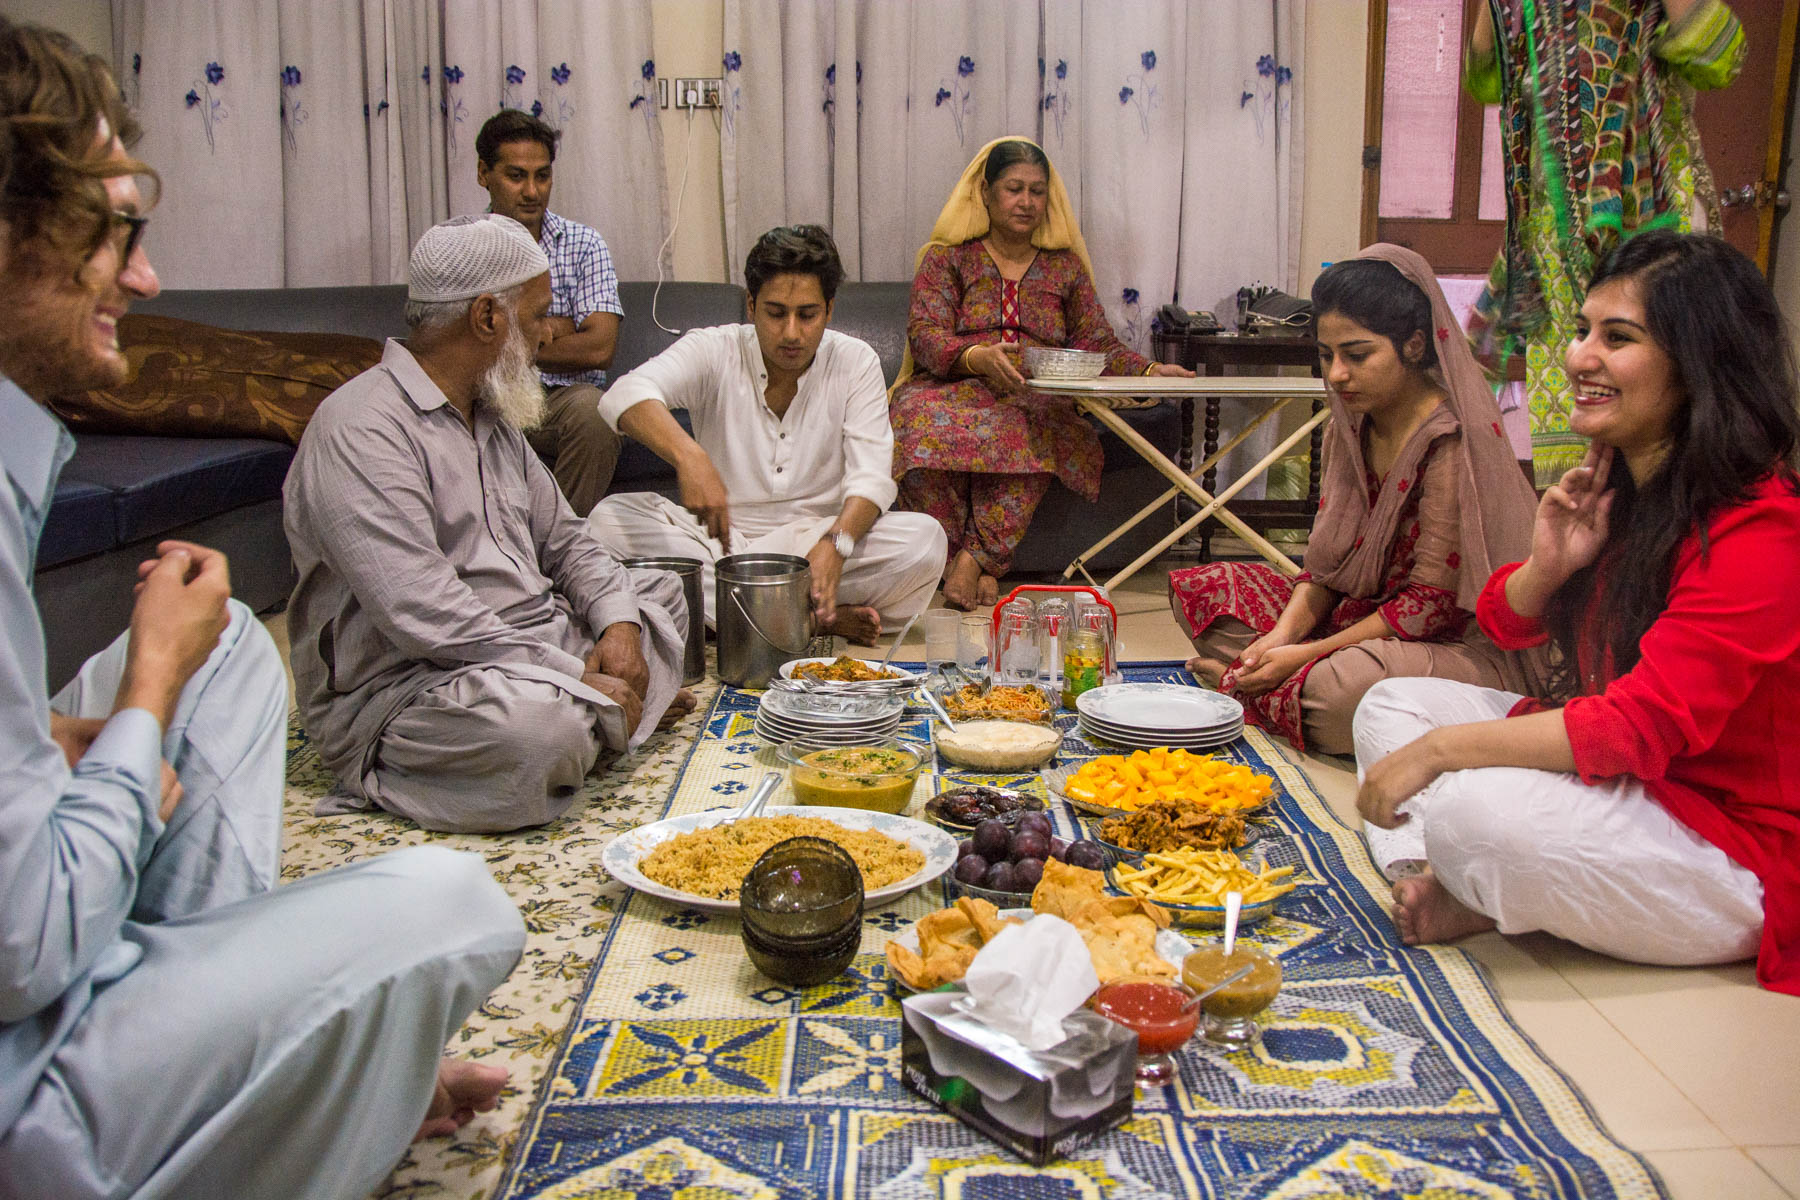 Pakistan bucket list - Iftar dinner in Lahore - Lost With Purpose travel blog